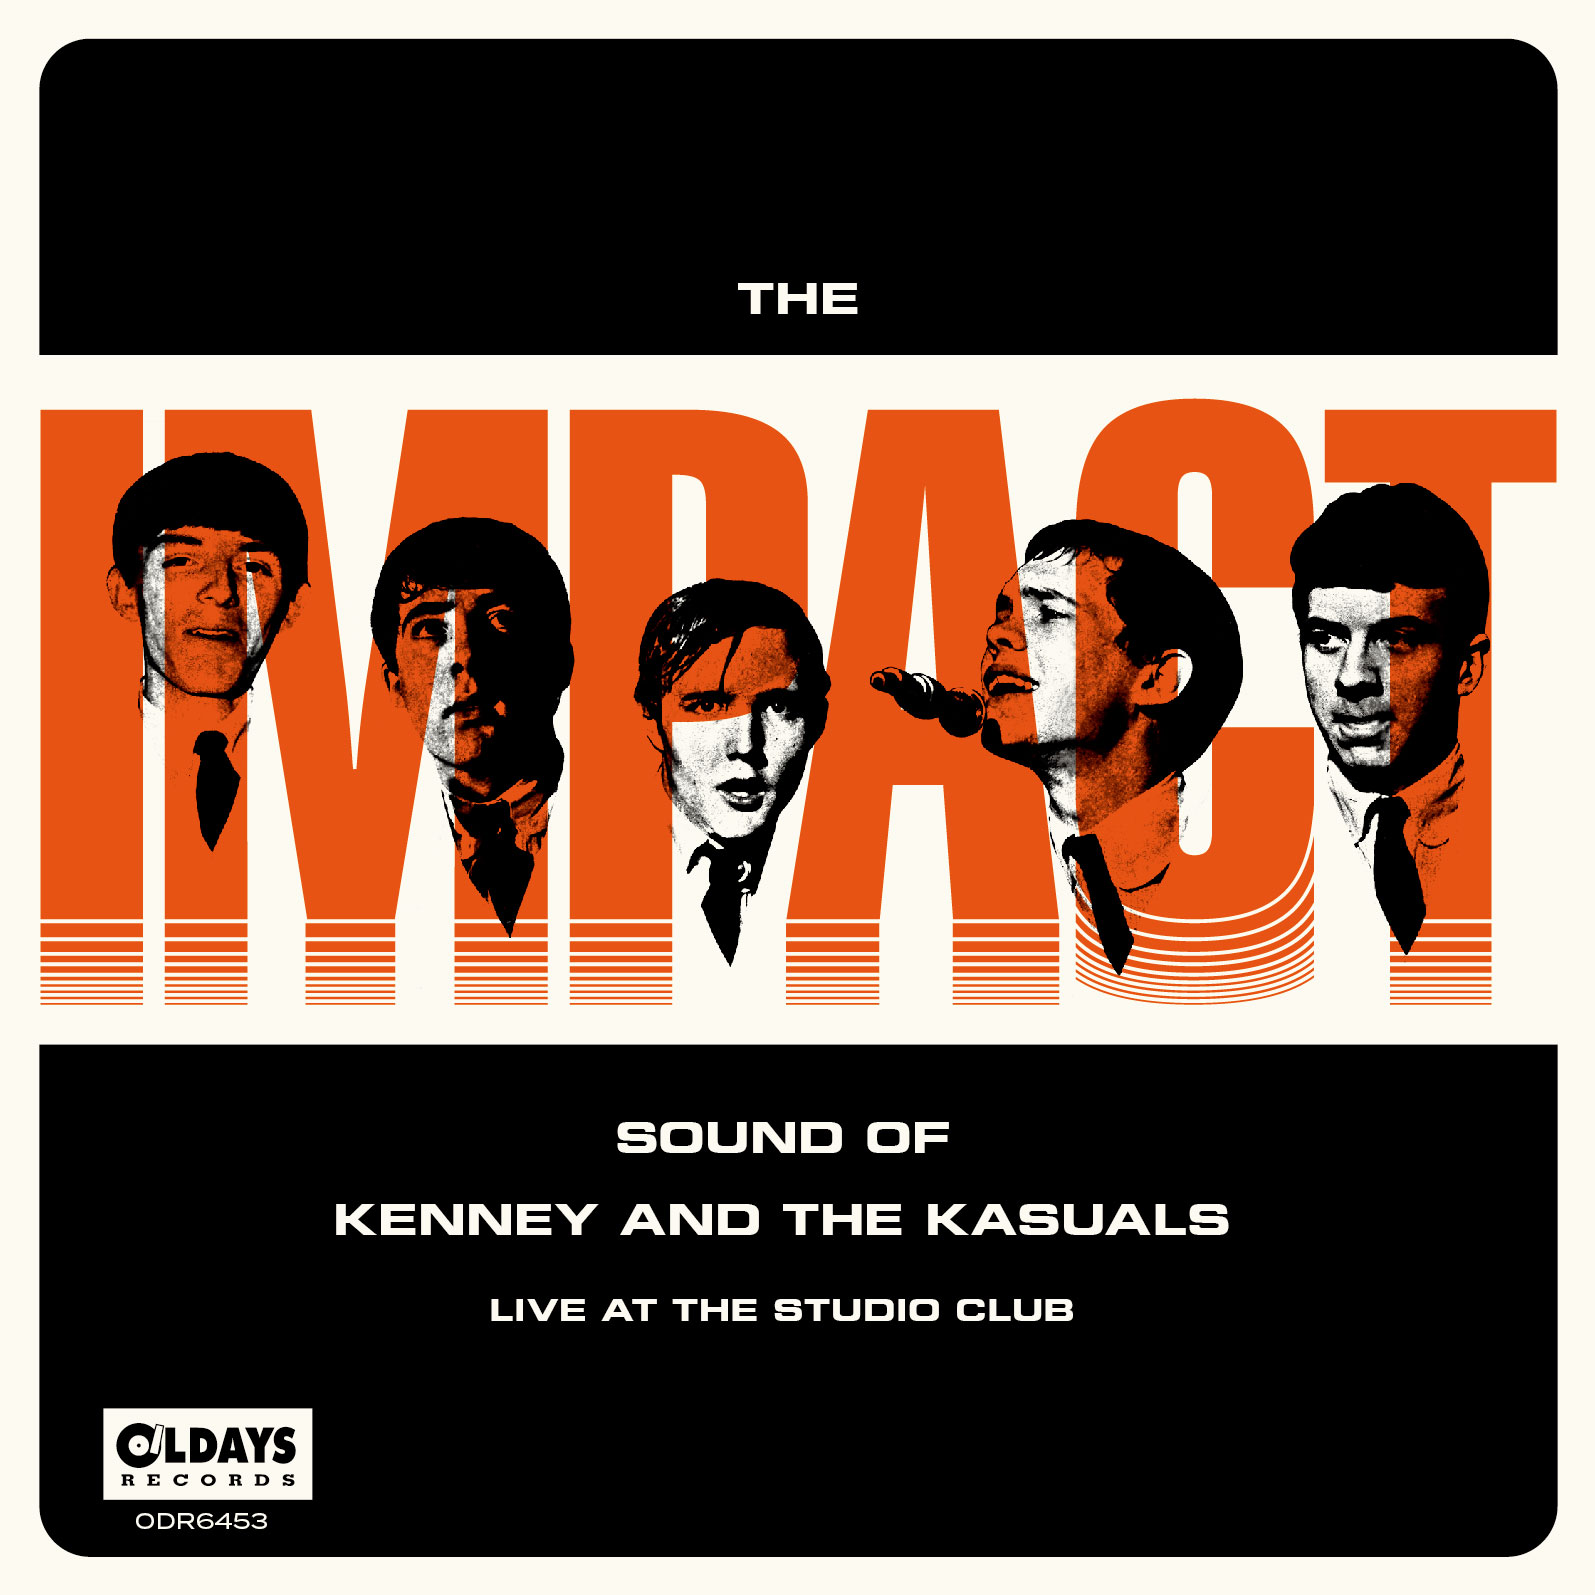 KENNY & THE KASUALS / ケニー・アンド・ザ・カジュアルズ / THE IMPACT SOUND OF KENNEY AND THE KASUALS (LIVE AT THE STUDIO CLUB) / ザ・インパクト・サウンド・オブ・ケニー・アンド・ザ・カジュアルズ